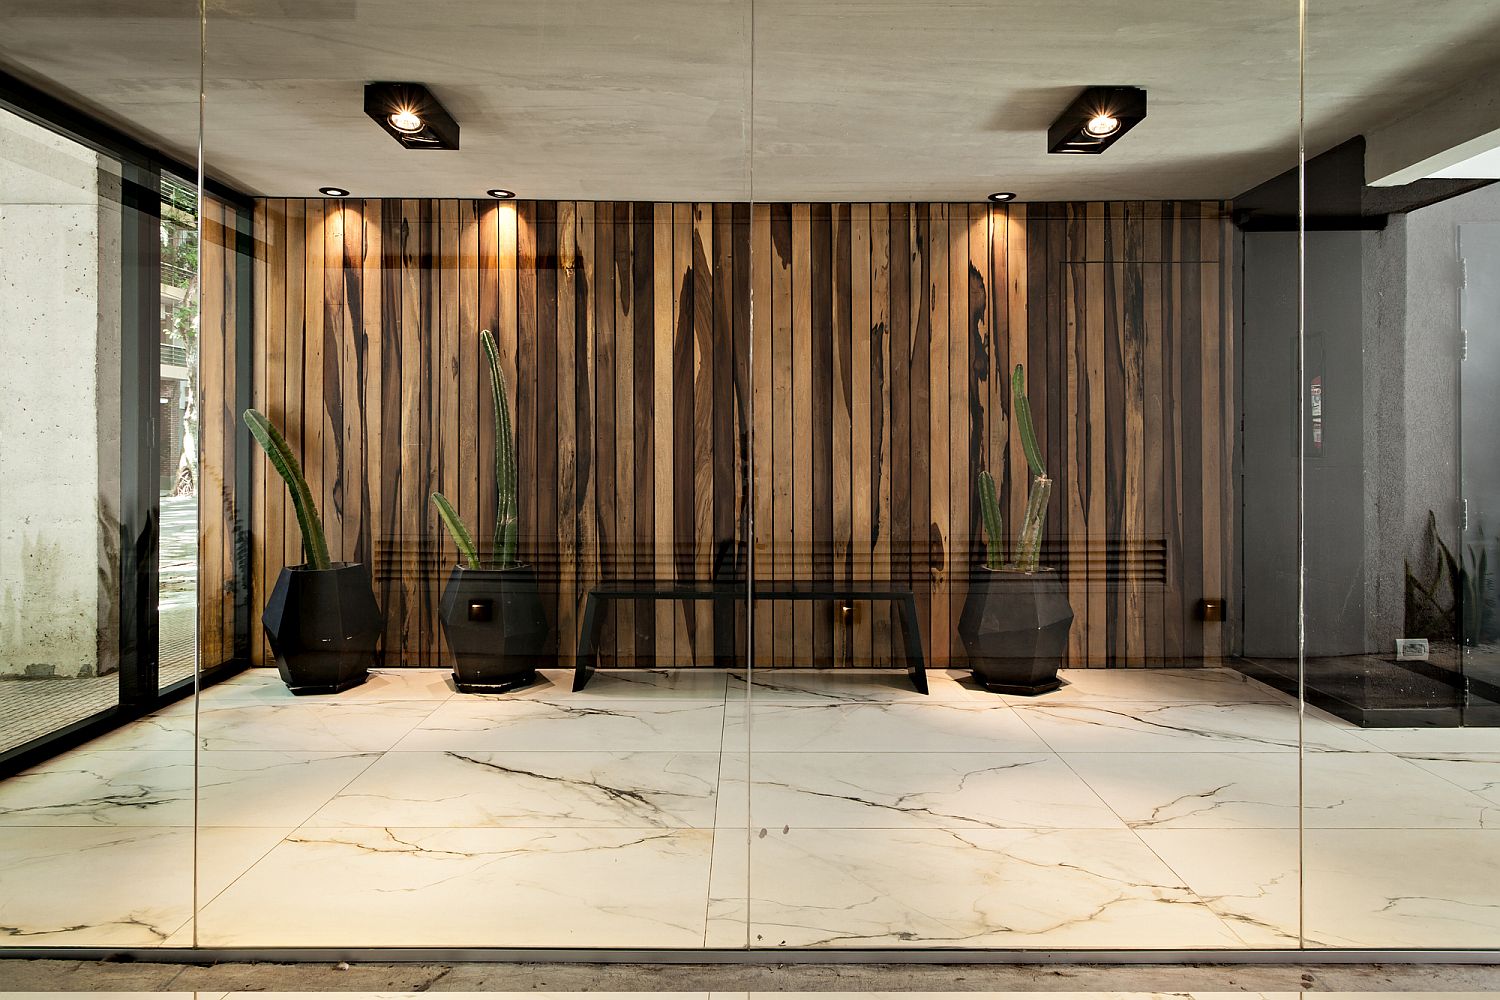 Solid wood panels are a feature throughout the apartment building